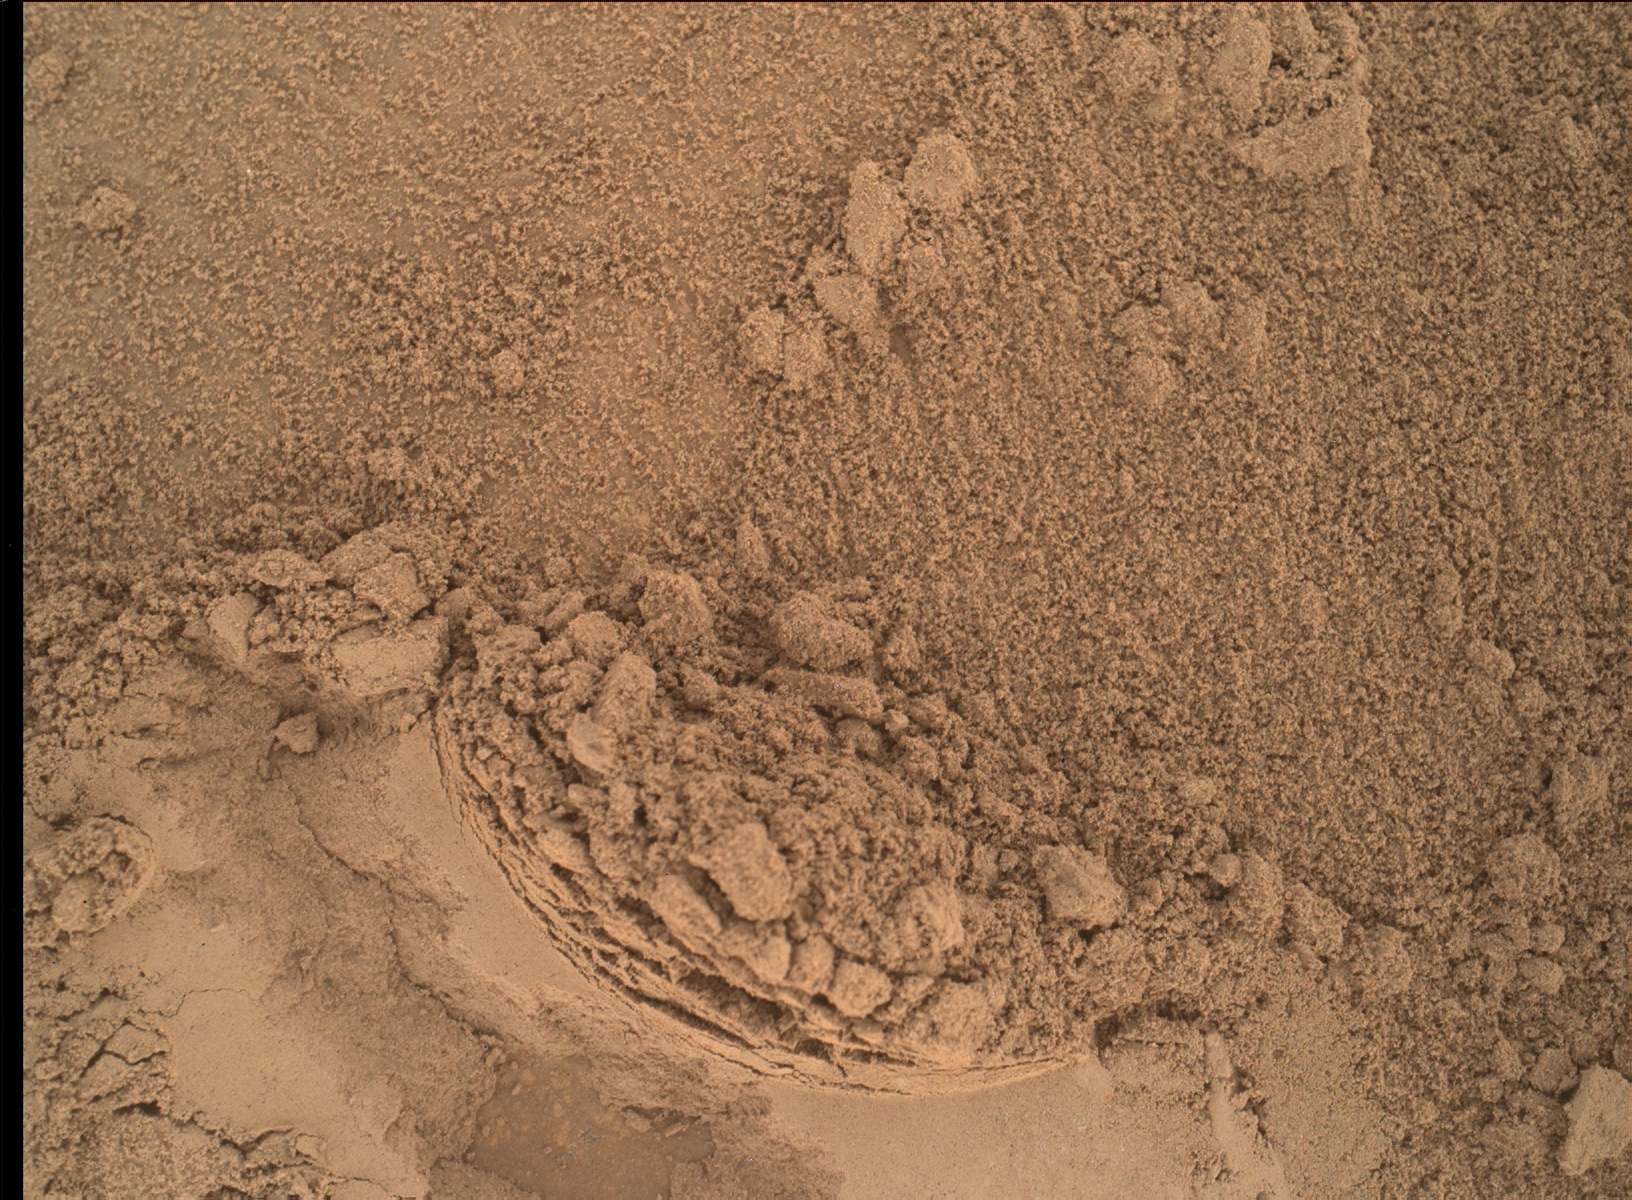 Nasa's Mars rover Curiosity acquired this image using its Mars Hand Lens Imager (MAHLI) on Sol 1427